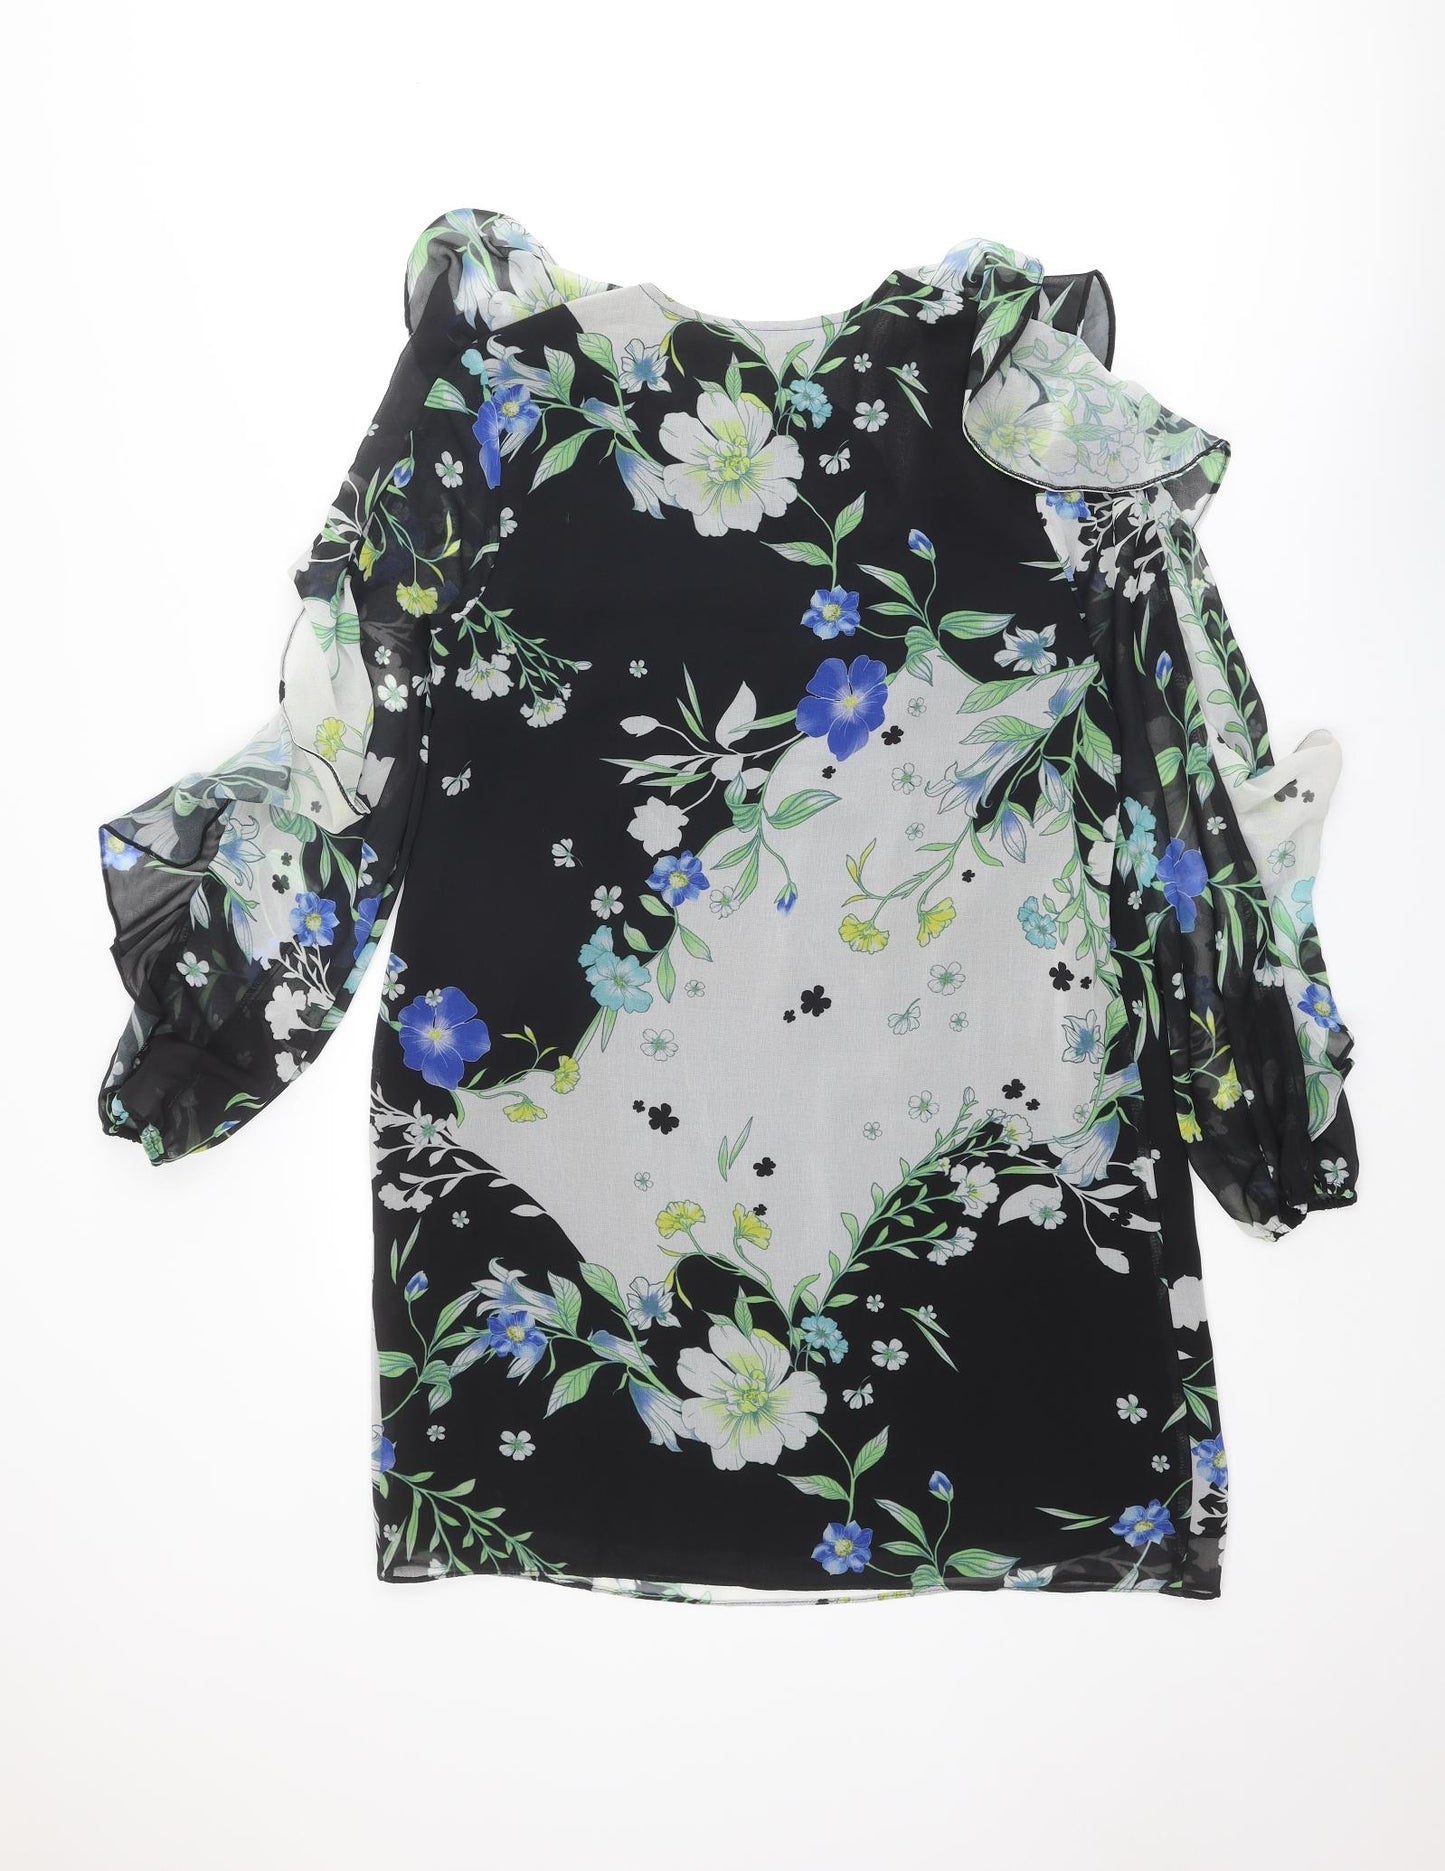 River Island Womens Multicoloured Floral Polyester Shift Size 12 V-Neck Pullover